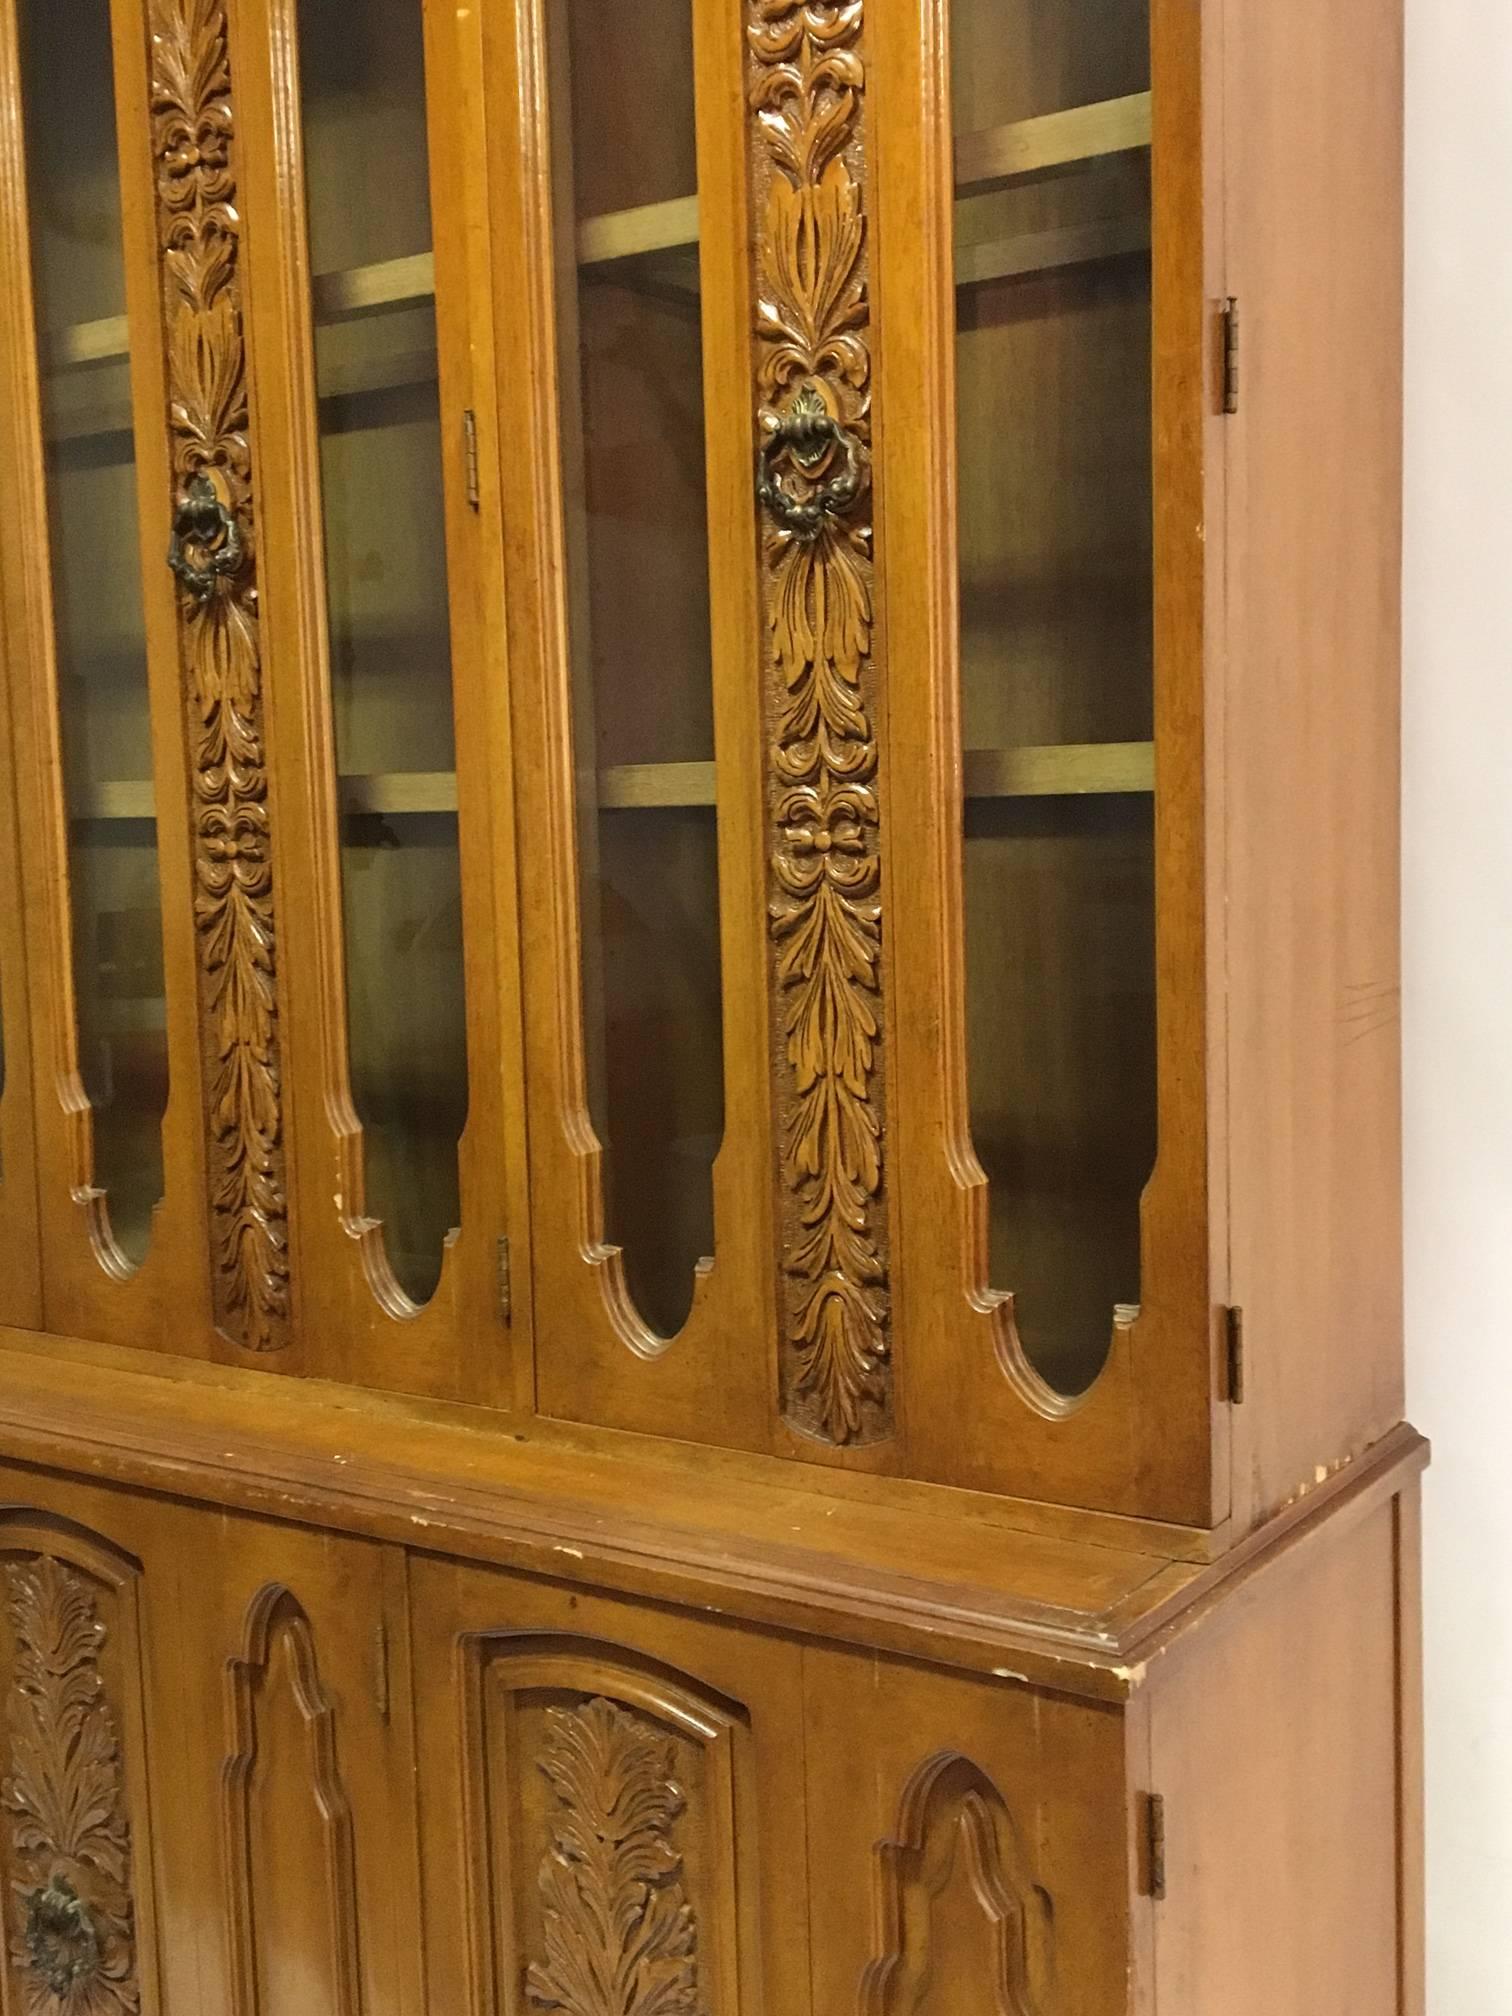 Monumental mid-century china cabinet. Beautiful ornately carved detail surrounds the front glass doors. 
Top hutch features interior lights and glass shelves for display. Lower credenza or sideboard features interior drawers and shelves.
Good